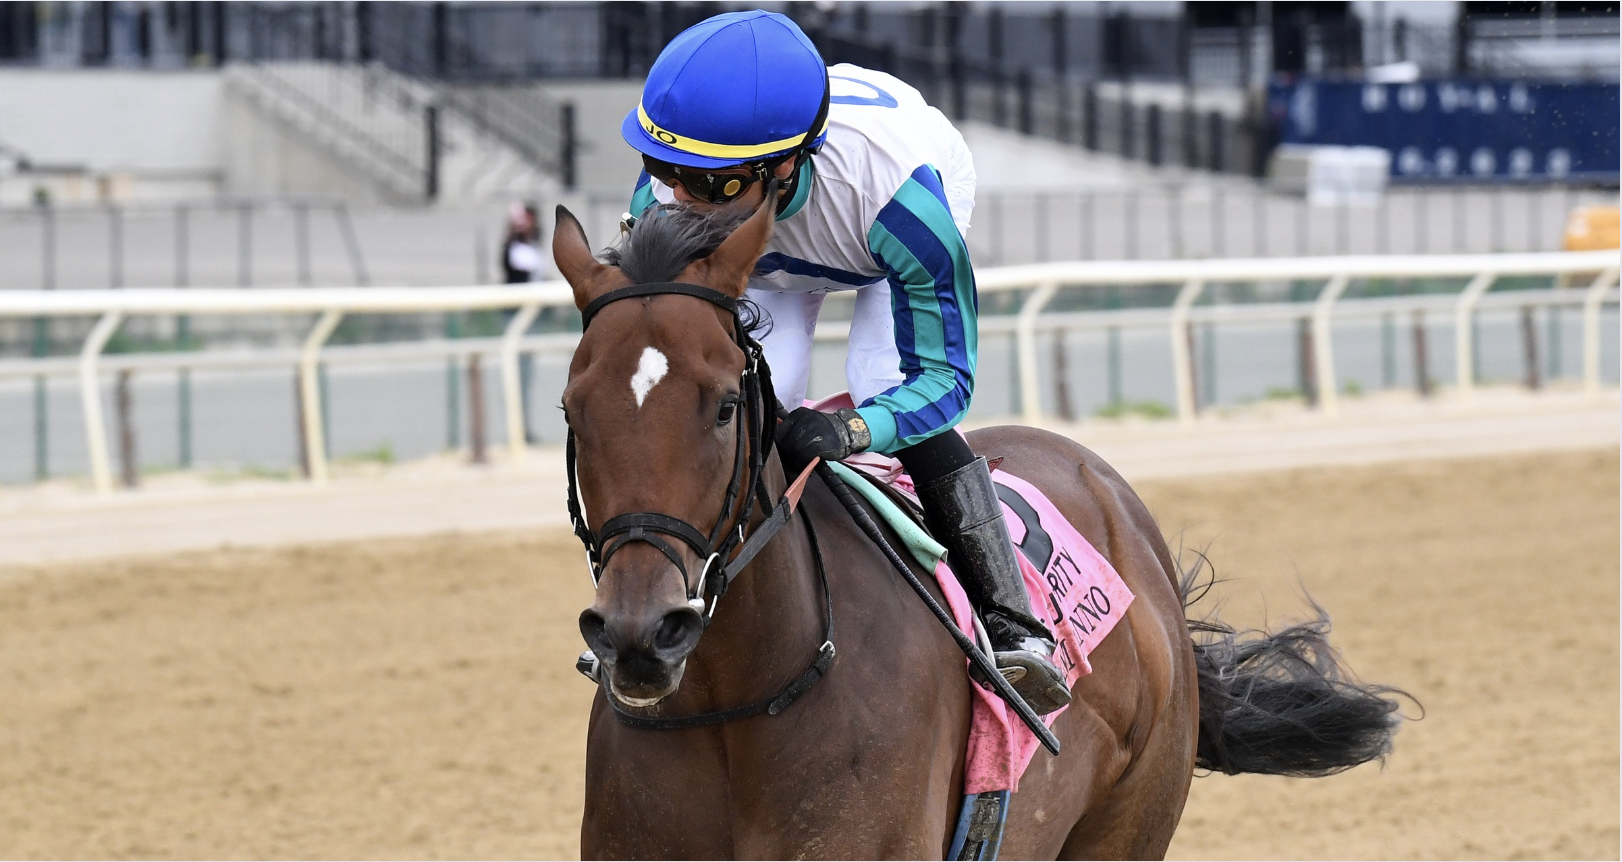 Book’em Danno headlines a strong G1 Woody Stephens presented by Mohegan